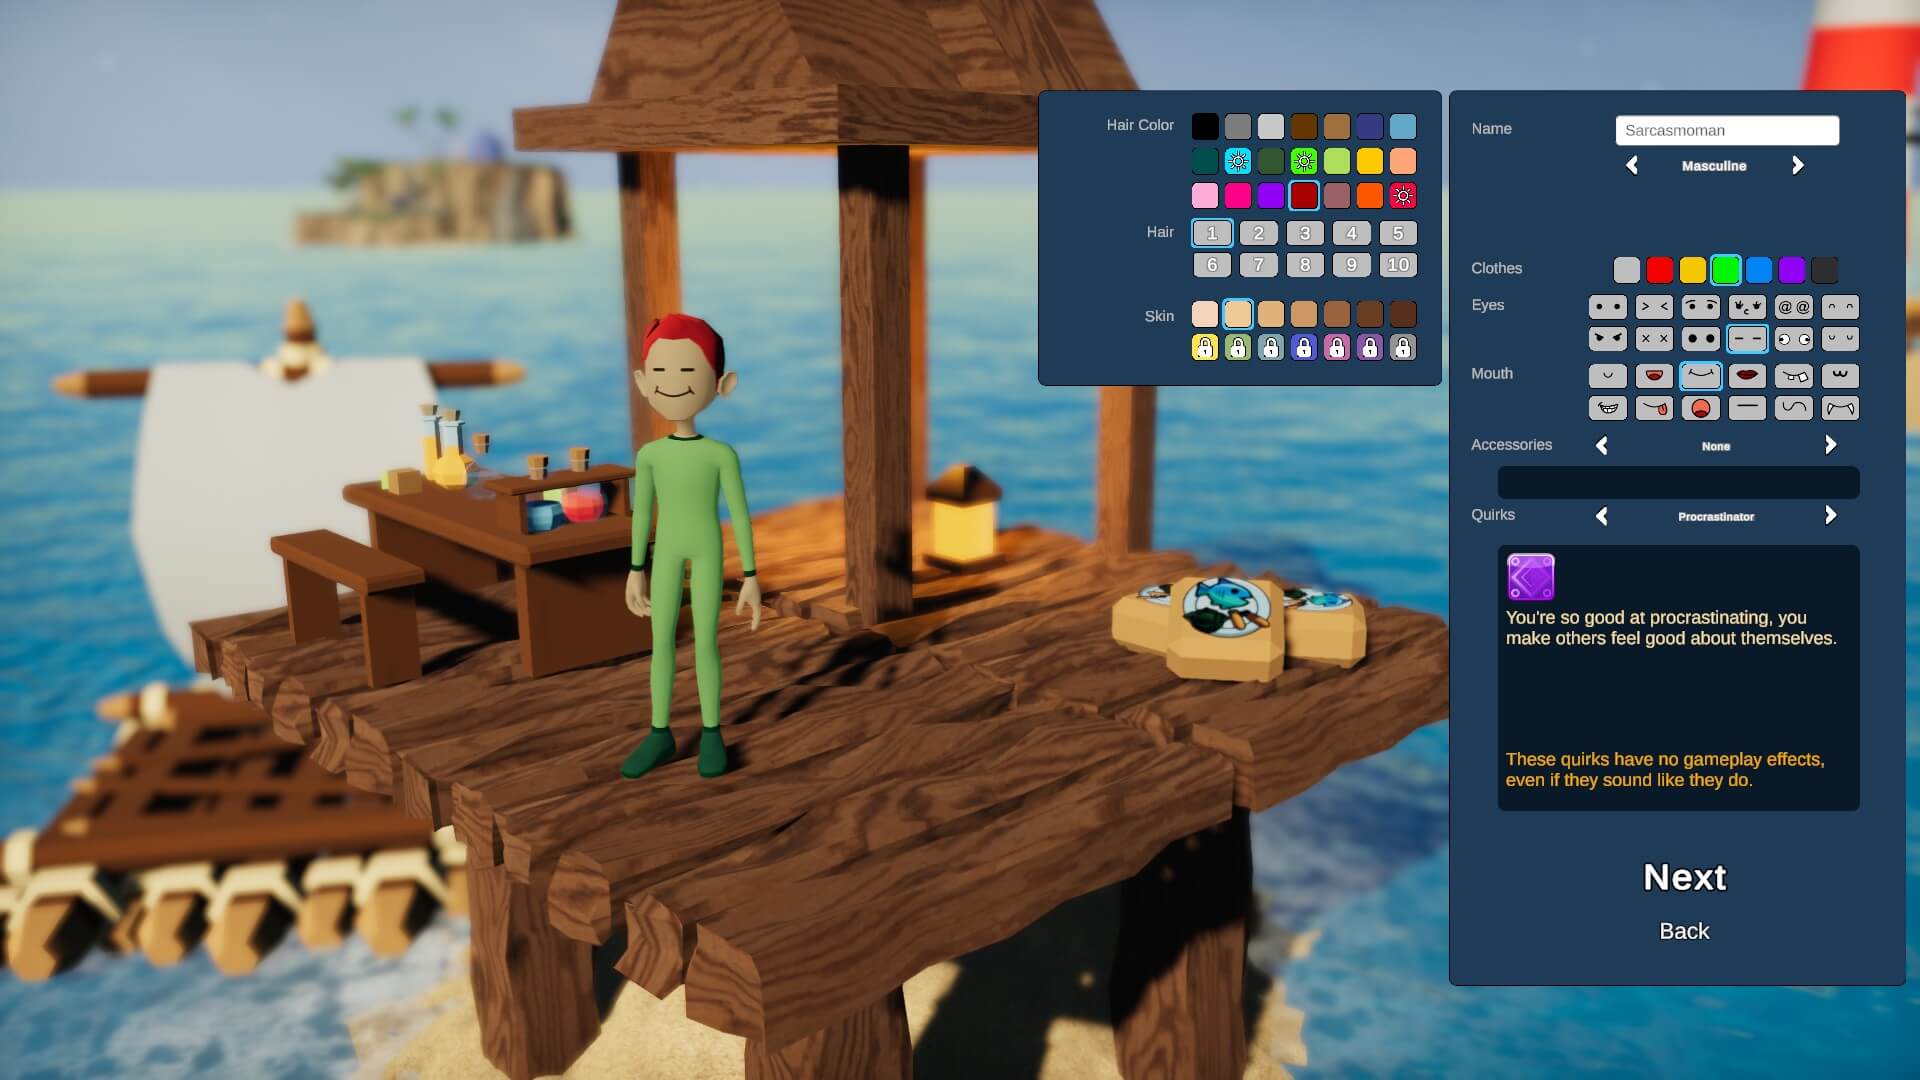 A dorky man stands on a wooden platform under a shelter in a green onesie. To the right of the screen are various colour options to change his appearance. The ship he came in on looks like it's sailing away to the left. Bummer!